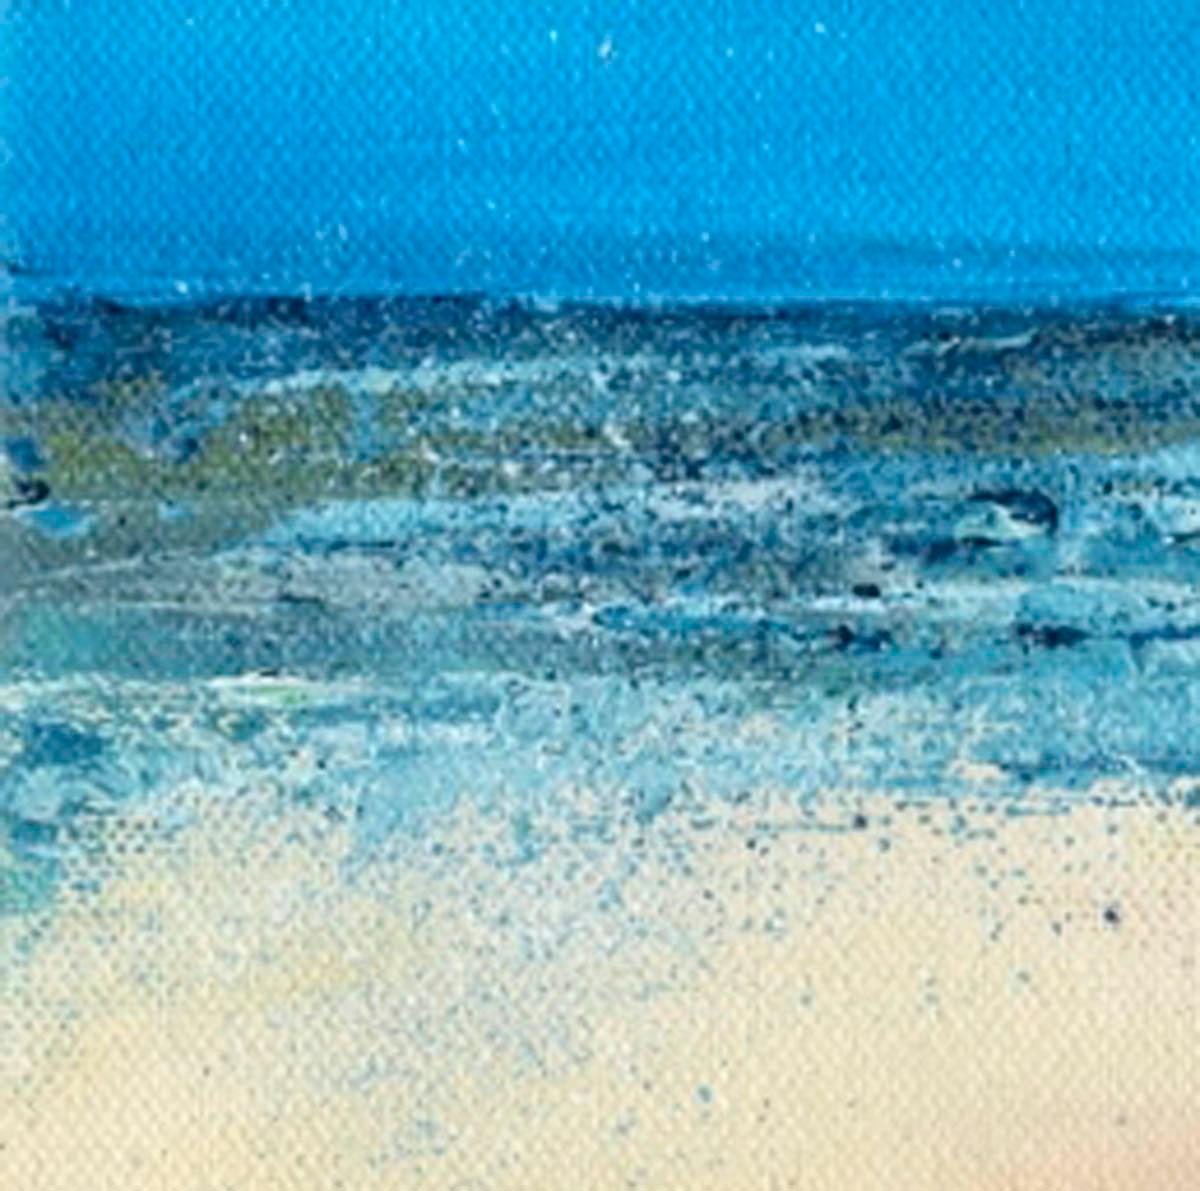 Janette George primarily paints landscapes and seascapes. She finds she is drawn to expressing places she has visited where light and colour interact to provide beauty – wide expansive skies, the hues of nature, reflections in water, textures and